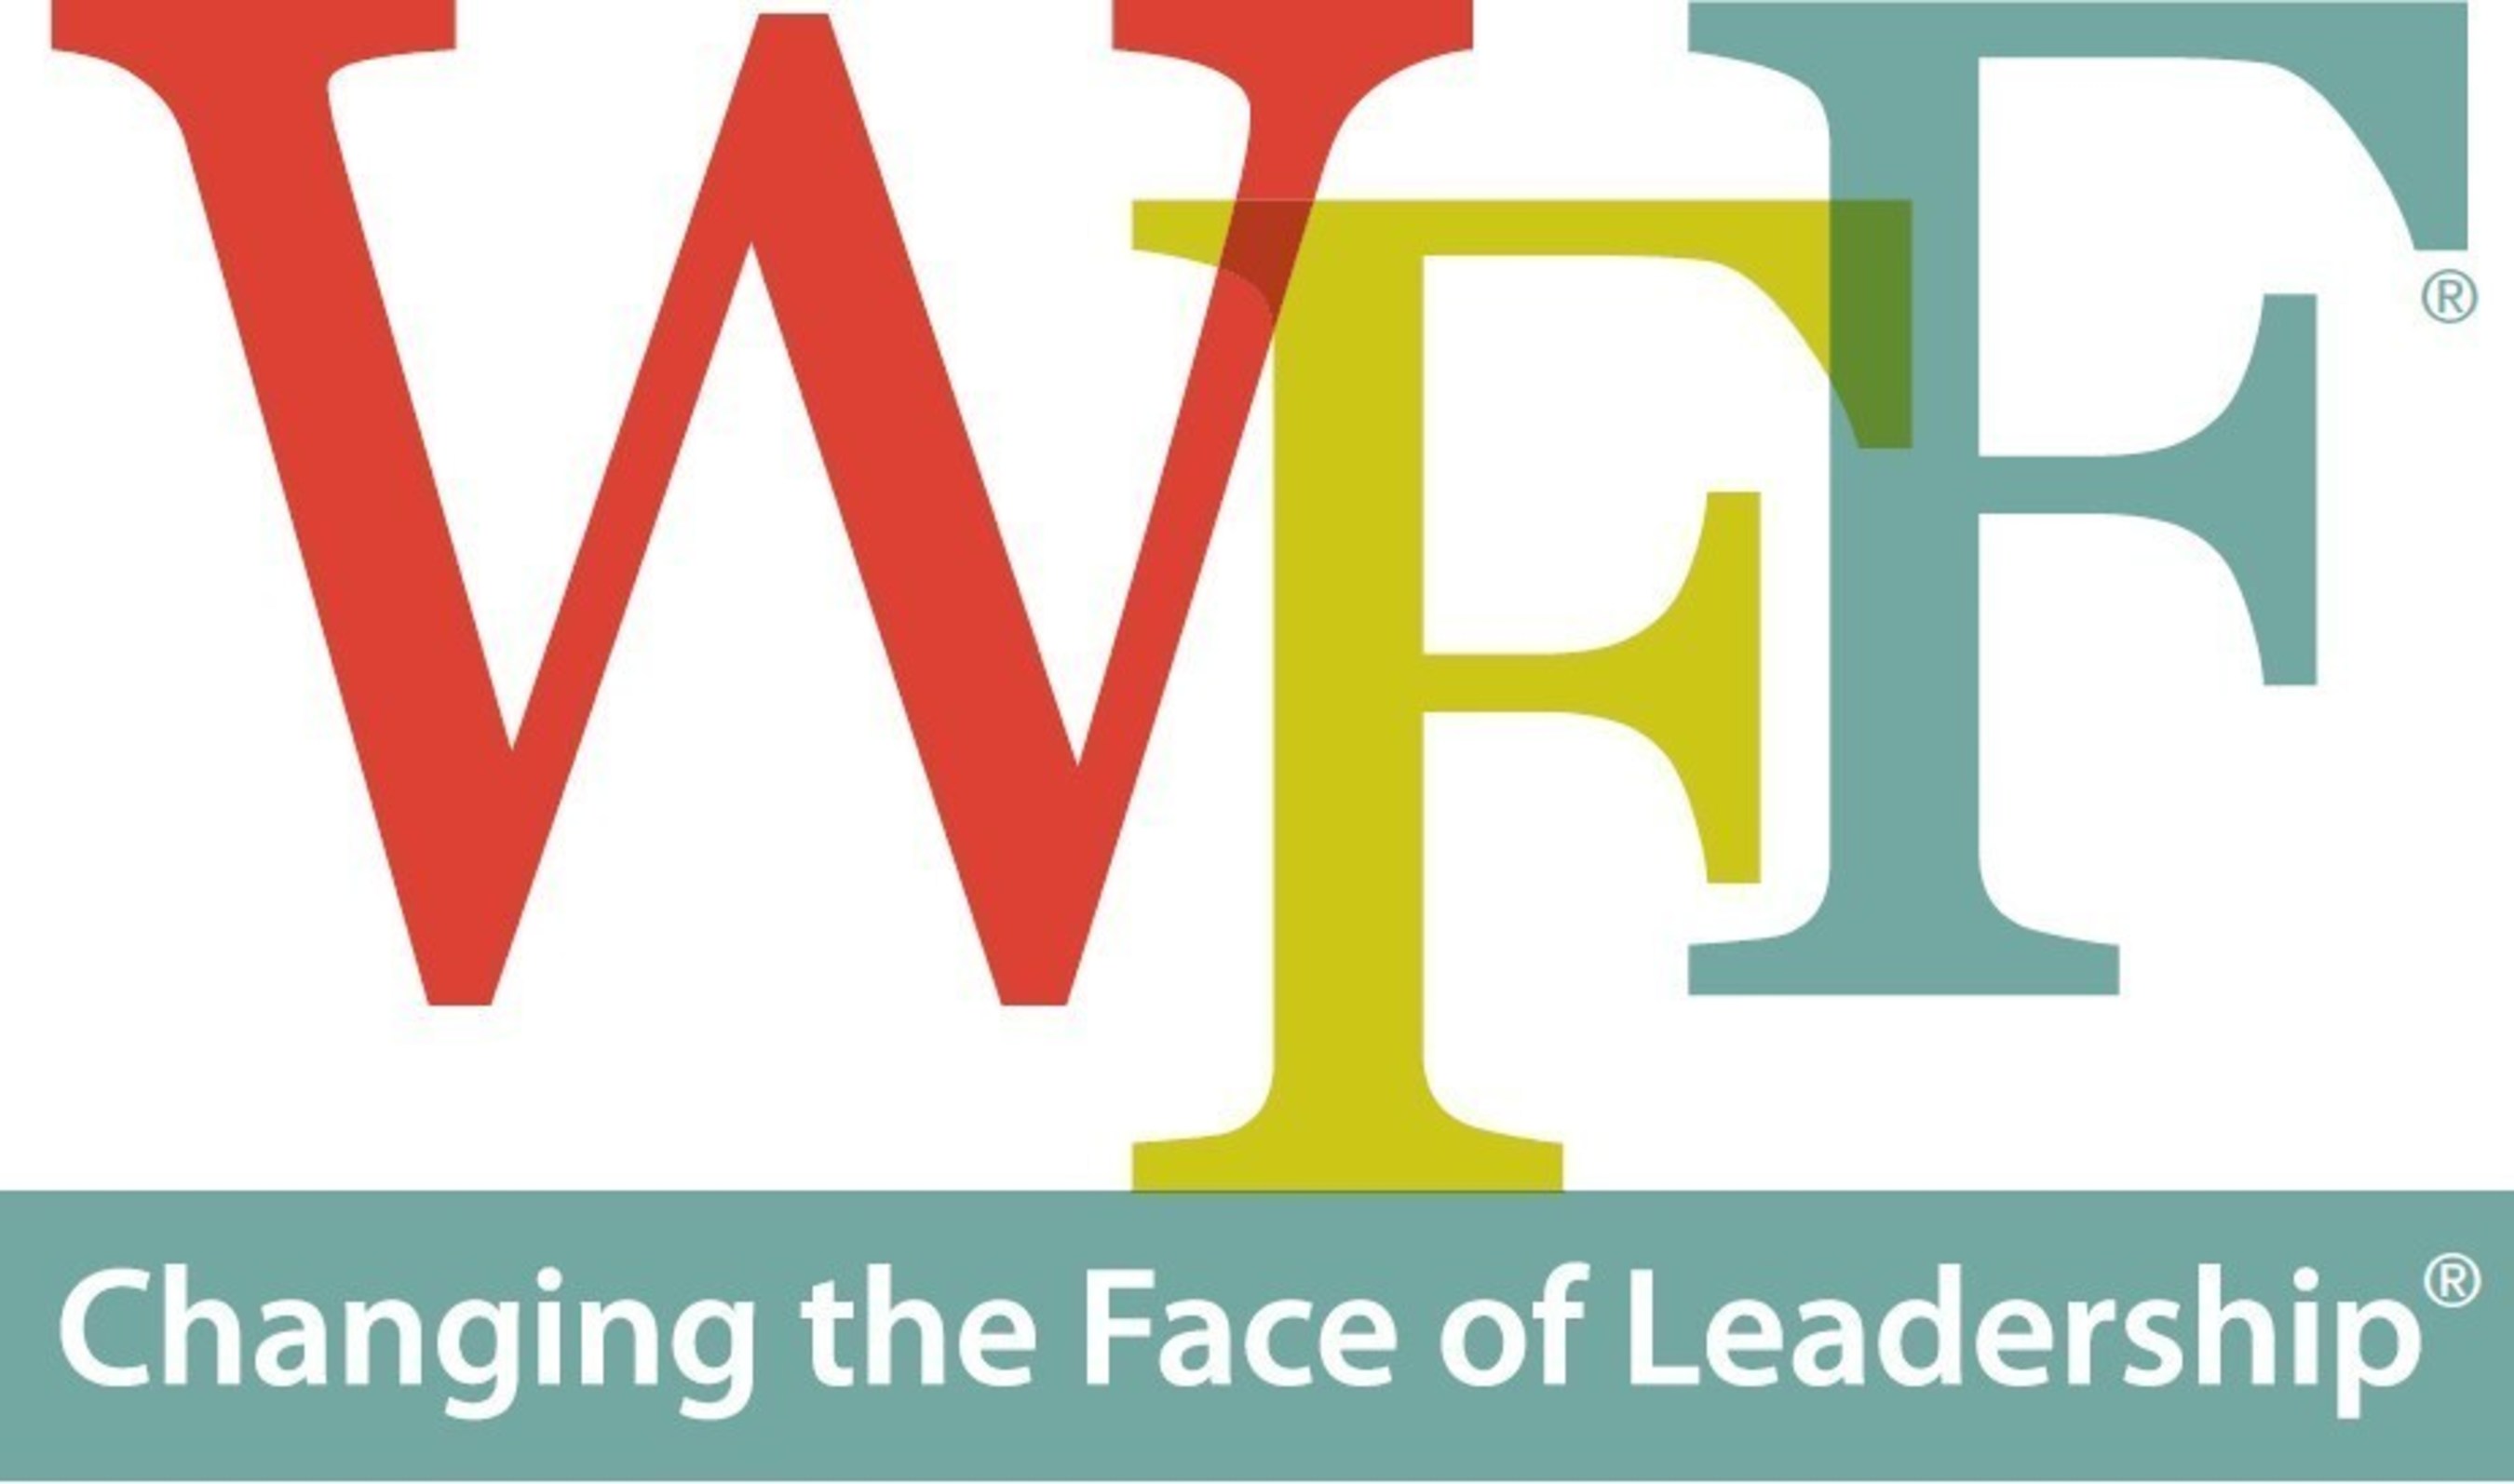 Women's Foodservice Forum - Changing the Face of Leadership (PRNewsFoto/The Women's Foodservice Forum)